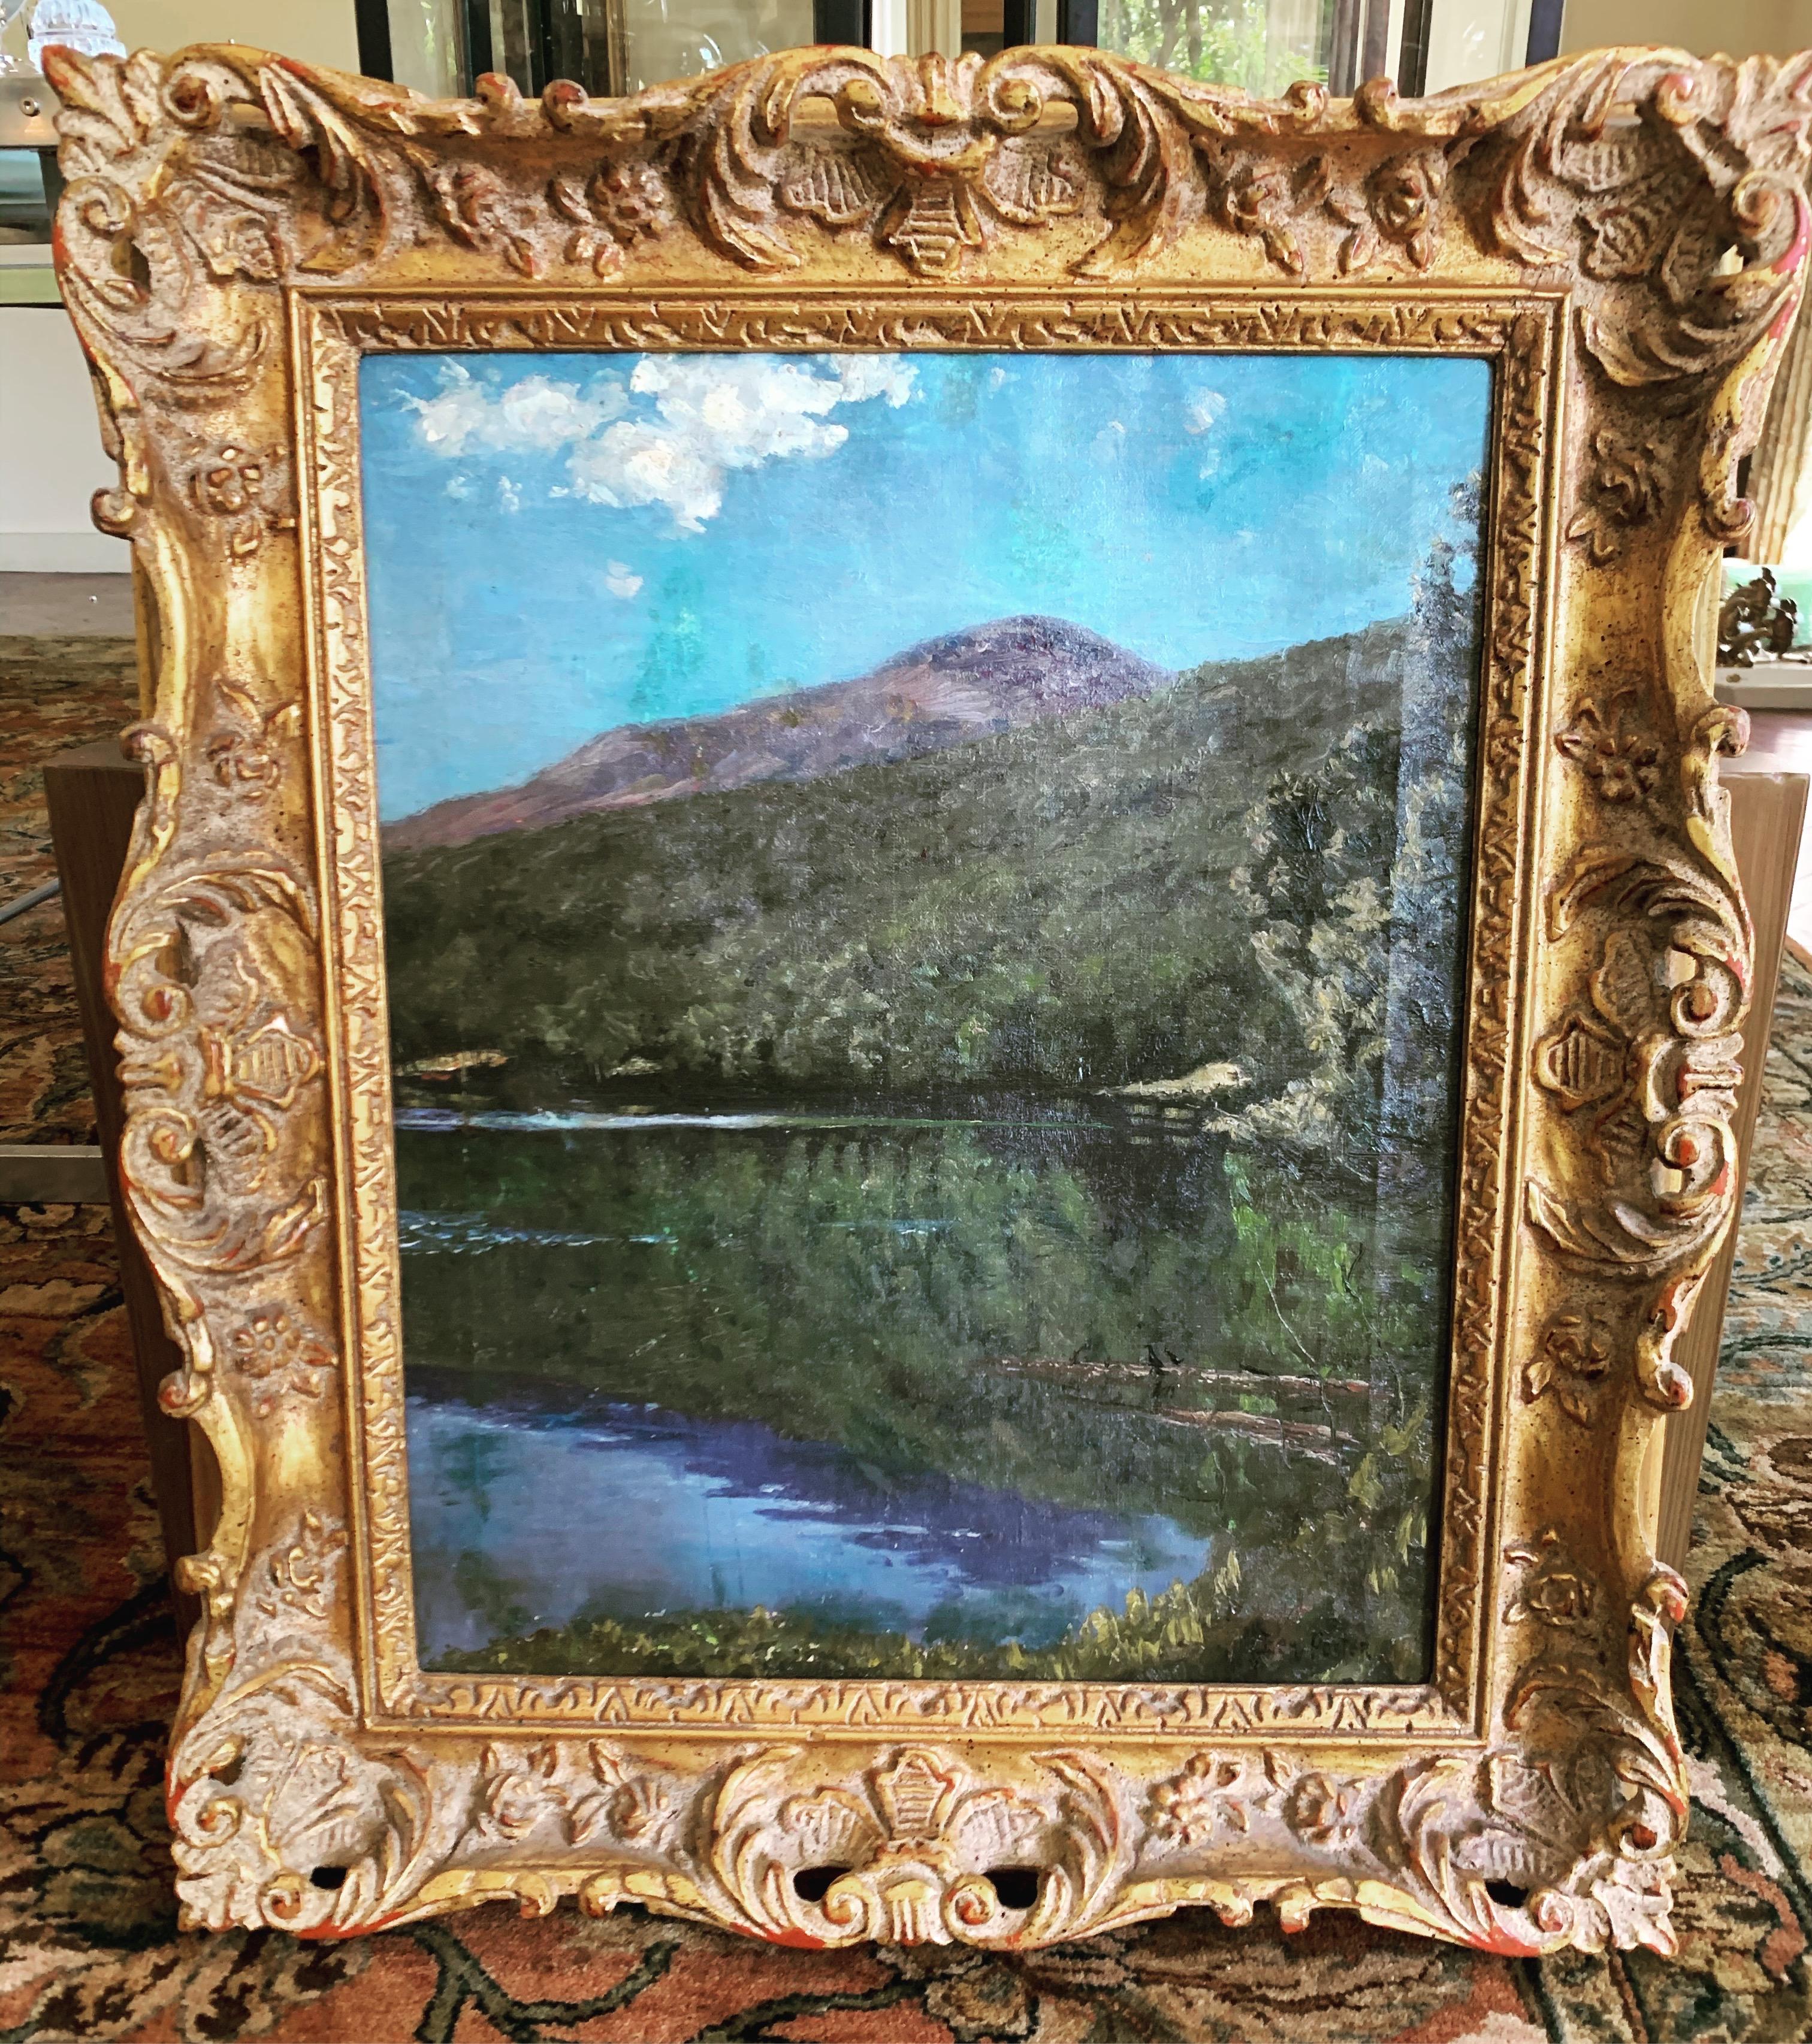 Original signed Ben Foster masterpiece. Medium is oil on canvas, circa late 19th century. Ben Foster was based in Maine and Europe and dies in 1926. His paintings sell at auction for up to $25,000.00.
Signature at bottom right.
  